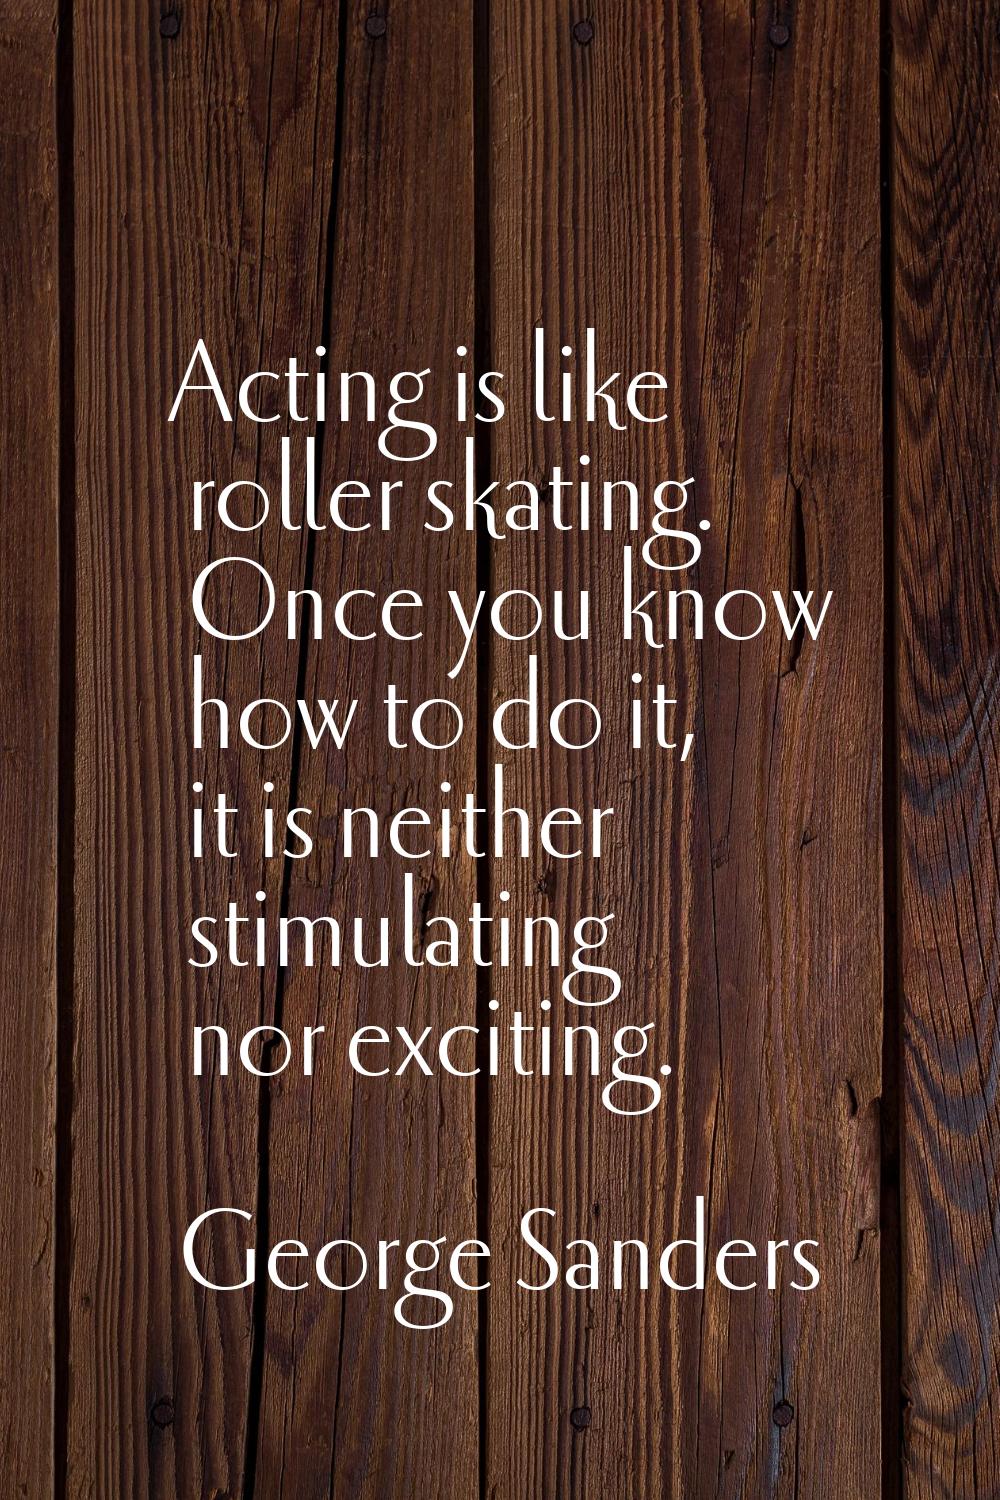 Acting is like roller skating. Once you know how to do it, it is neither stimulating nor exciting.